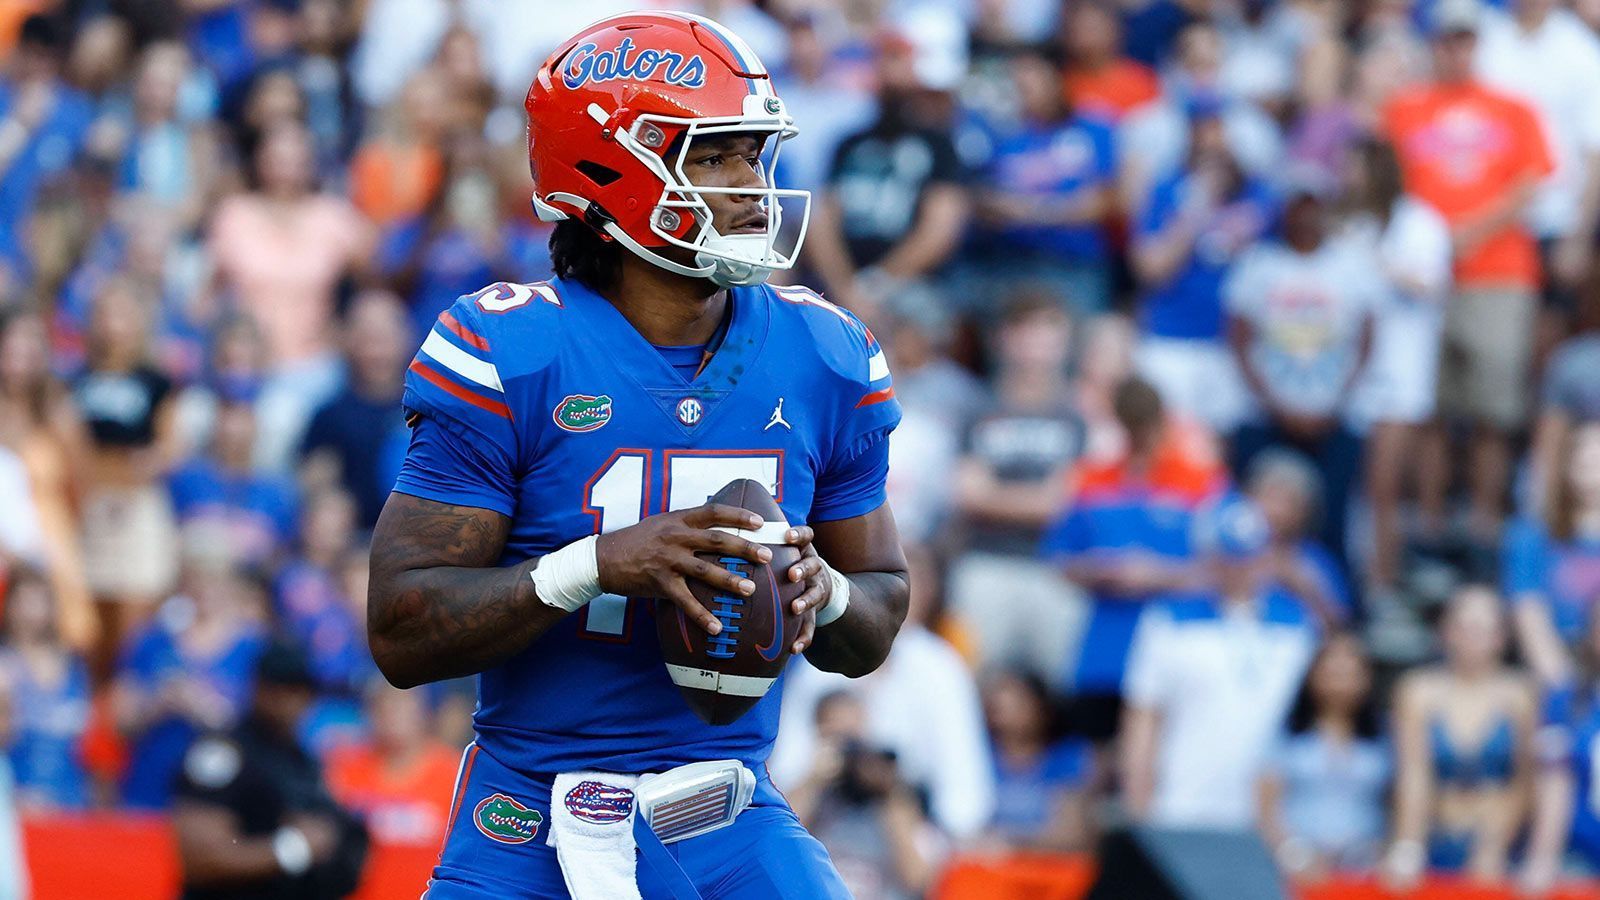 
                <strong>Anthony Richardson</strong><br>
                &#x2022; Position: Quarterback<br>&#x2022; College: University of Florida<br>
              